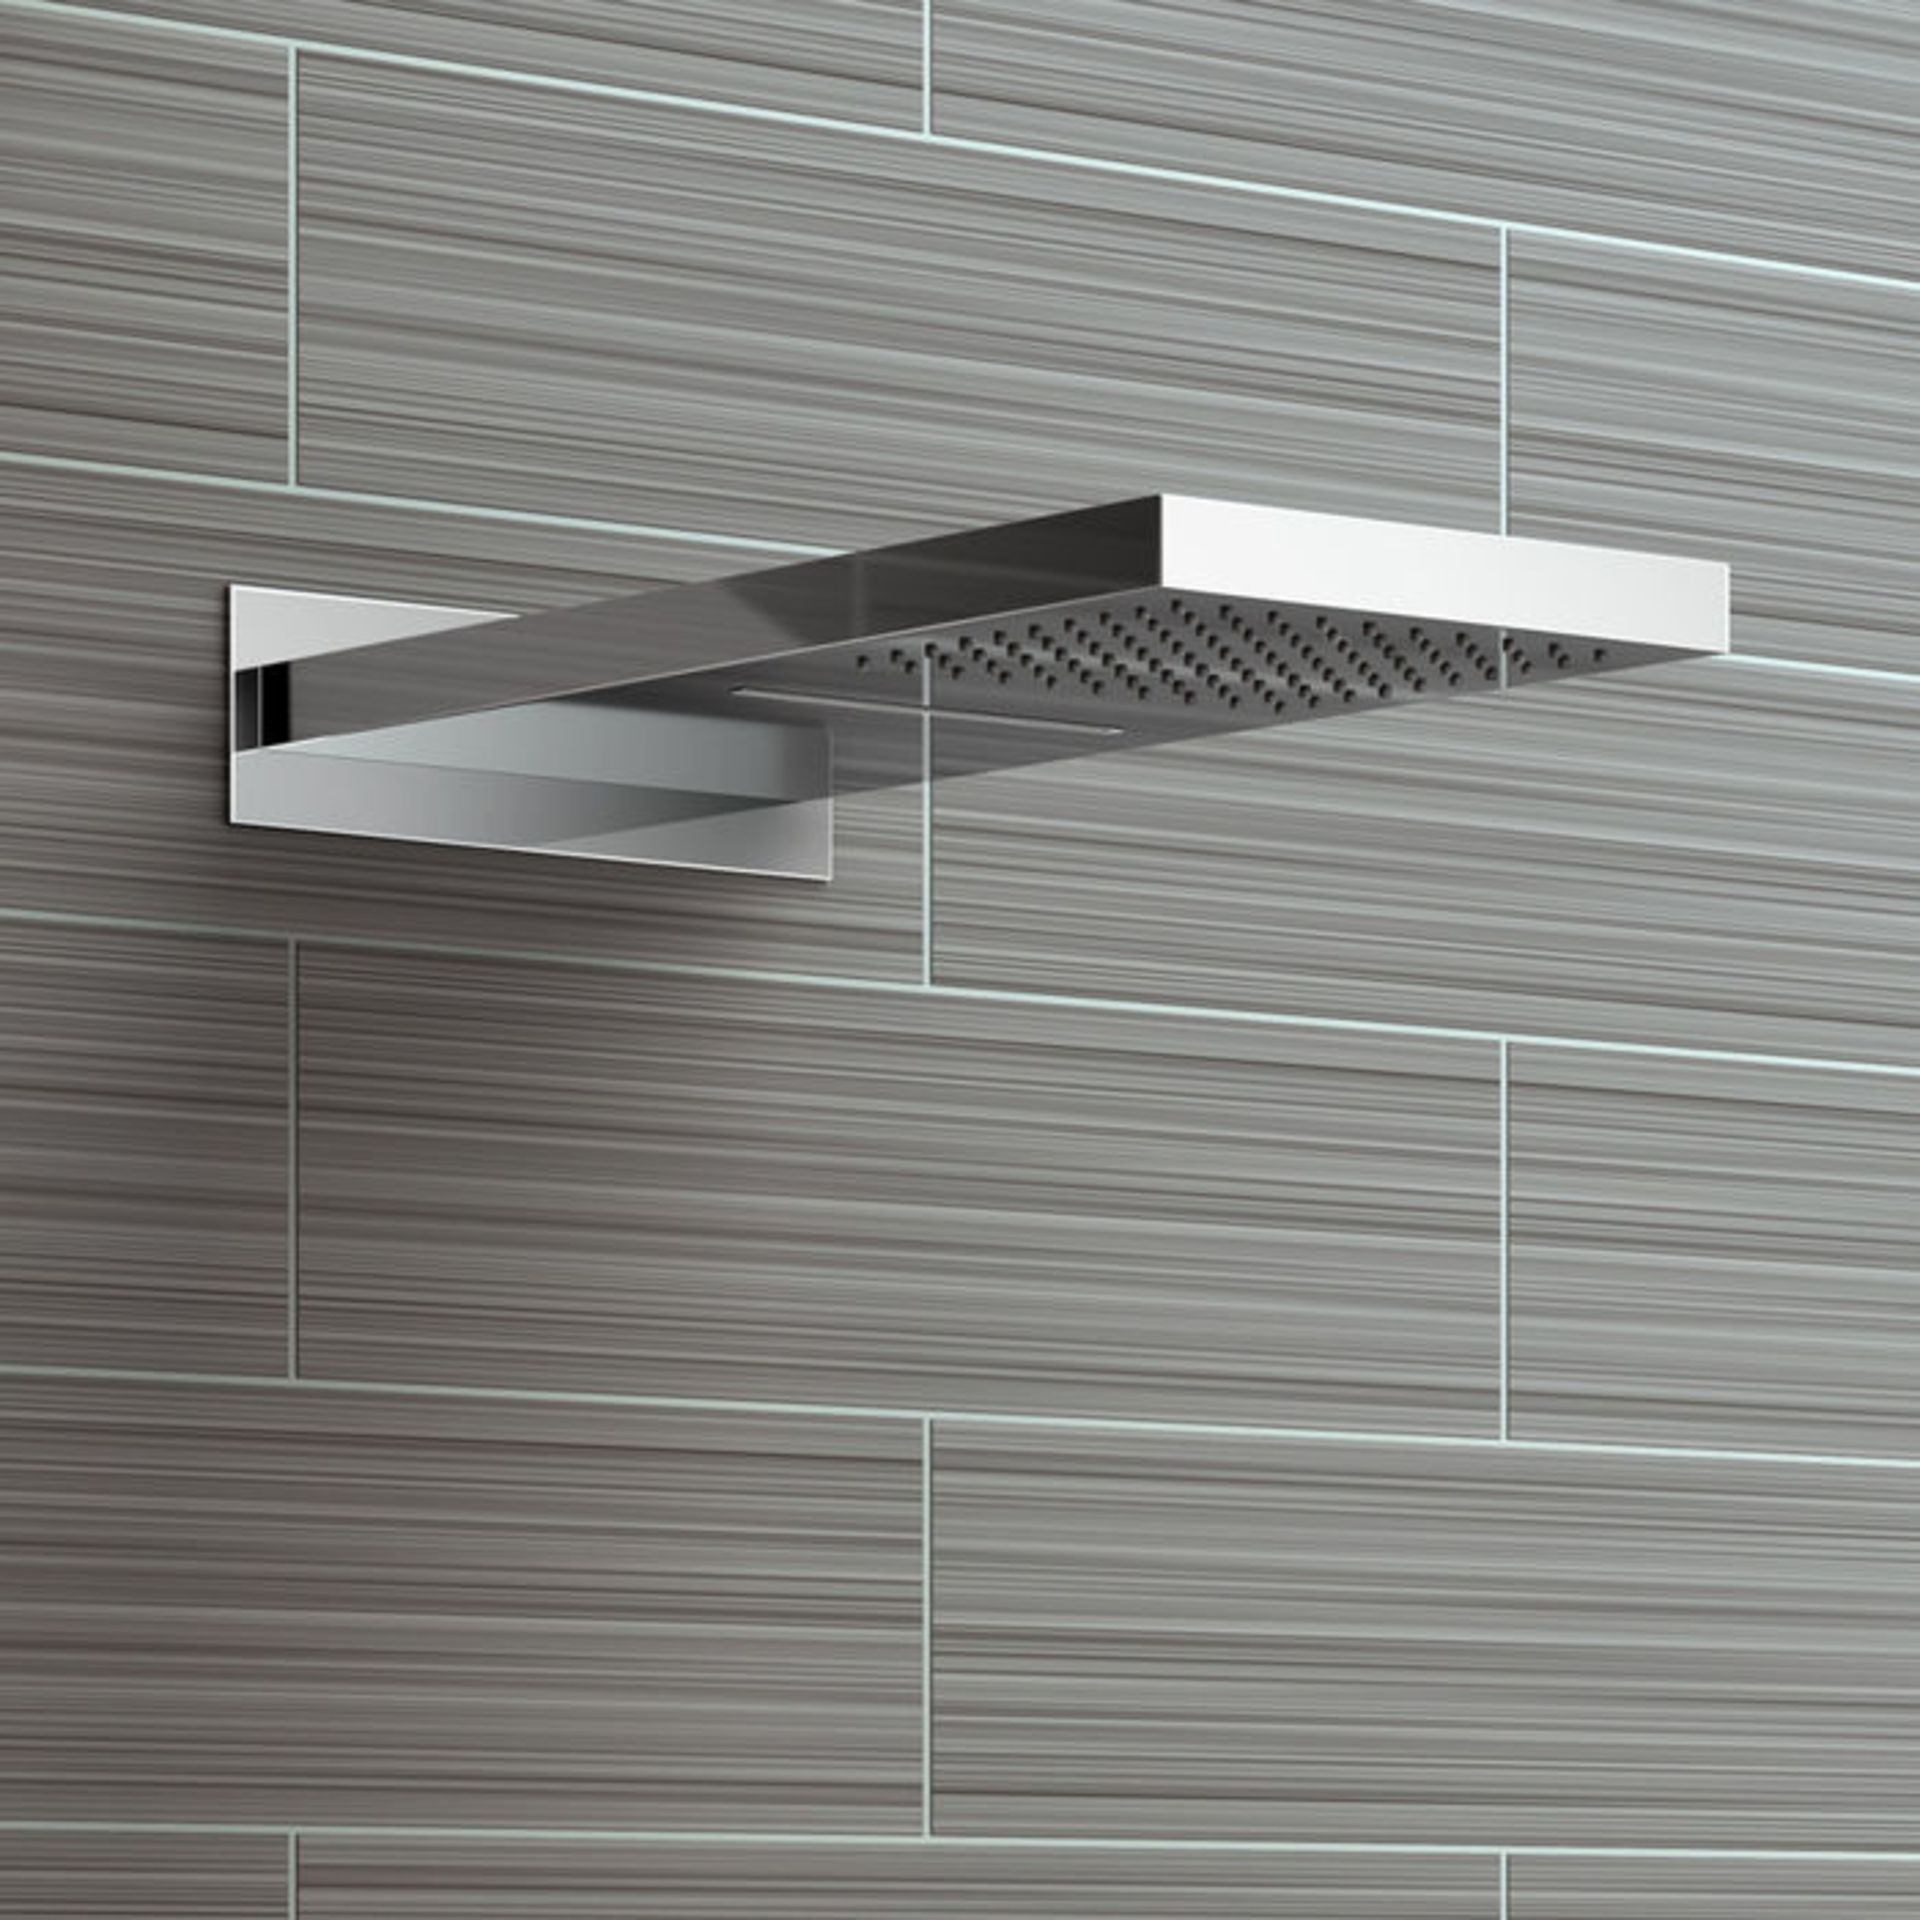 (DK5) Stainless Steel 230x500mm Waterfall Shower Head. RRP £374.98. Dual function waterfall and - Image 4 of 6